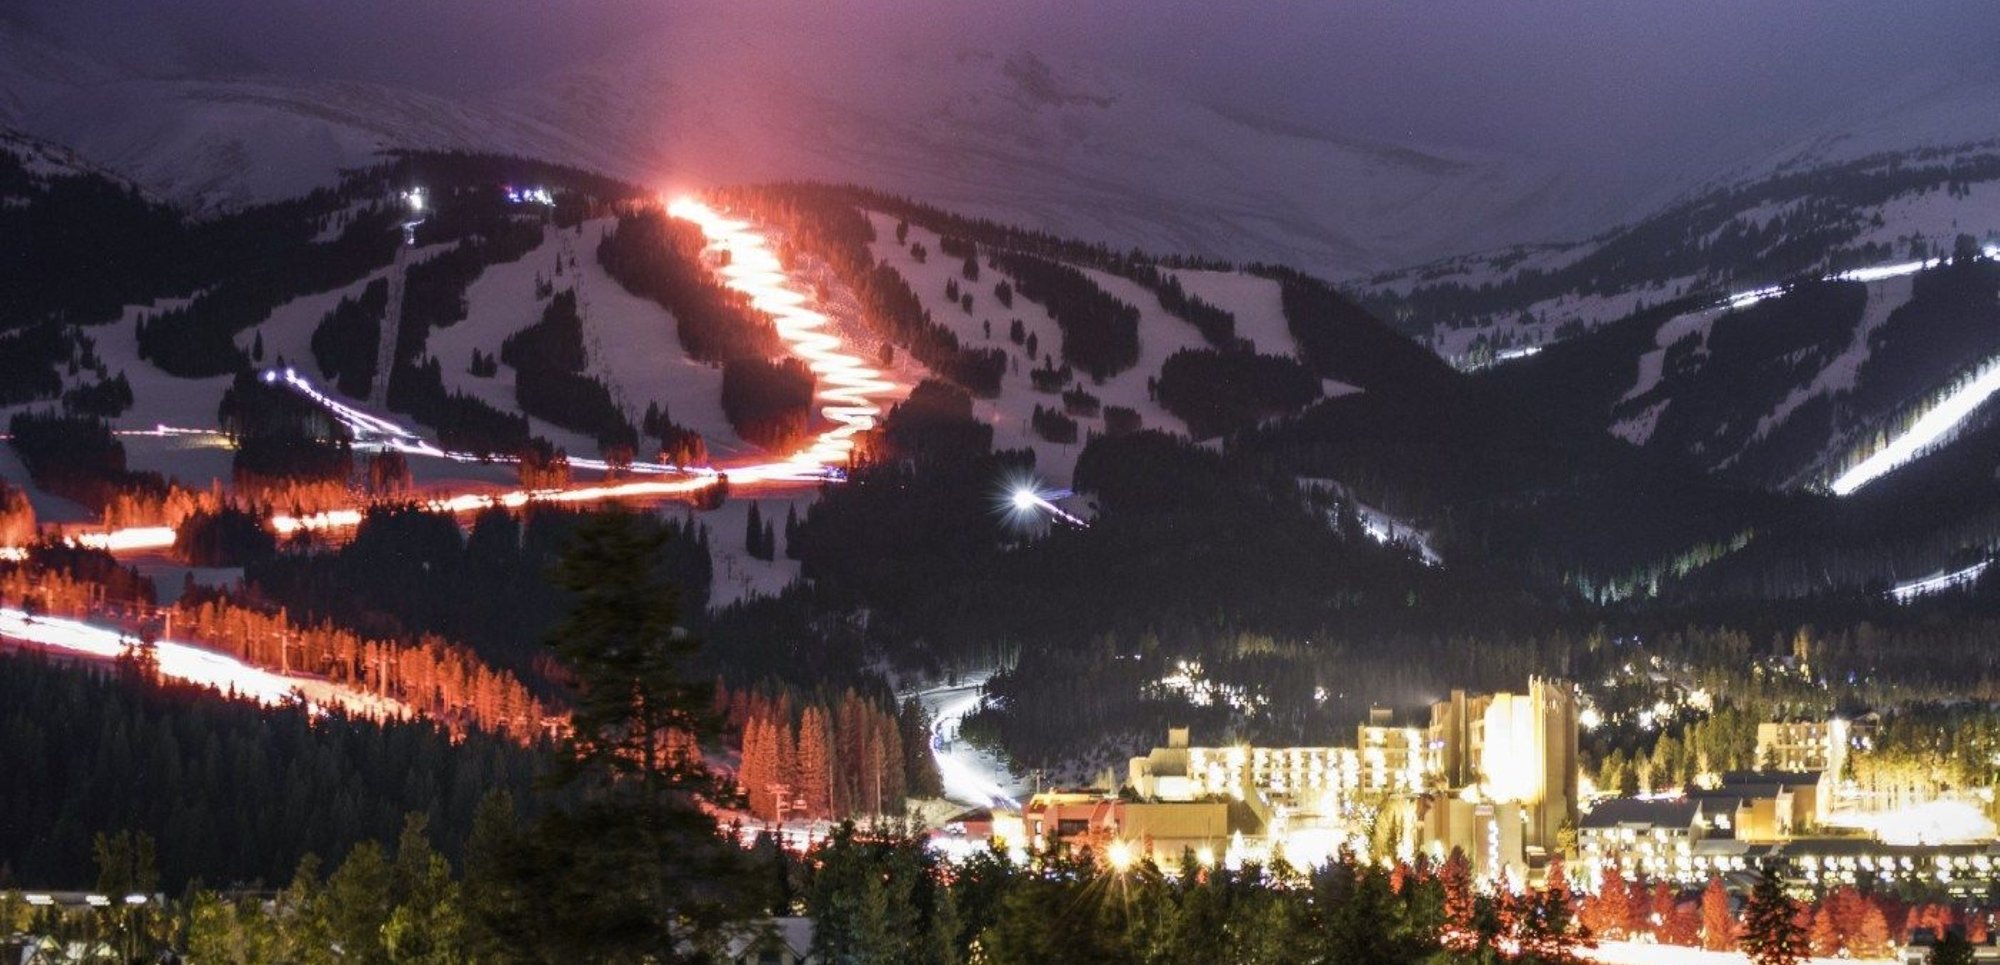 The Annual NYE Torch Parade in Breckenridge, CO